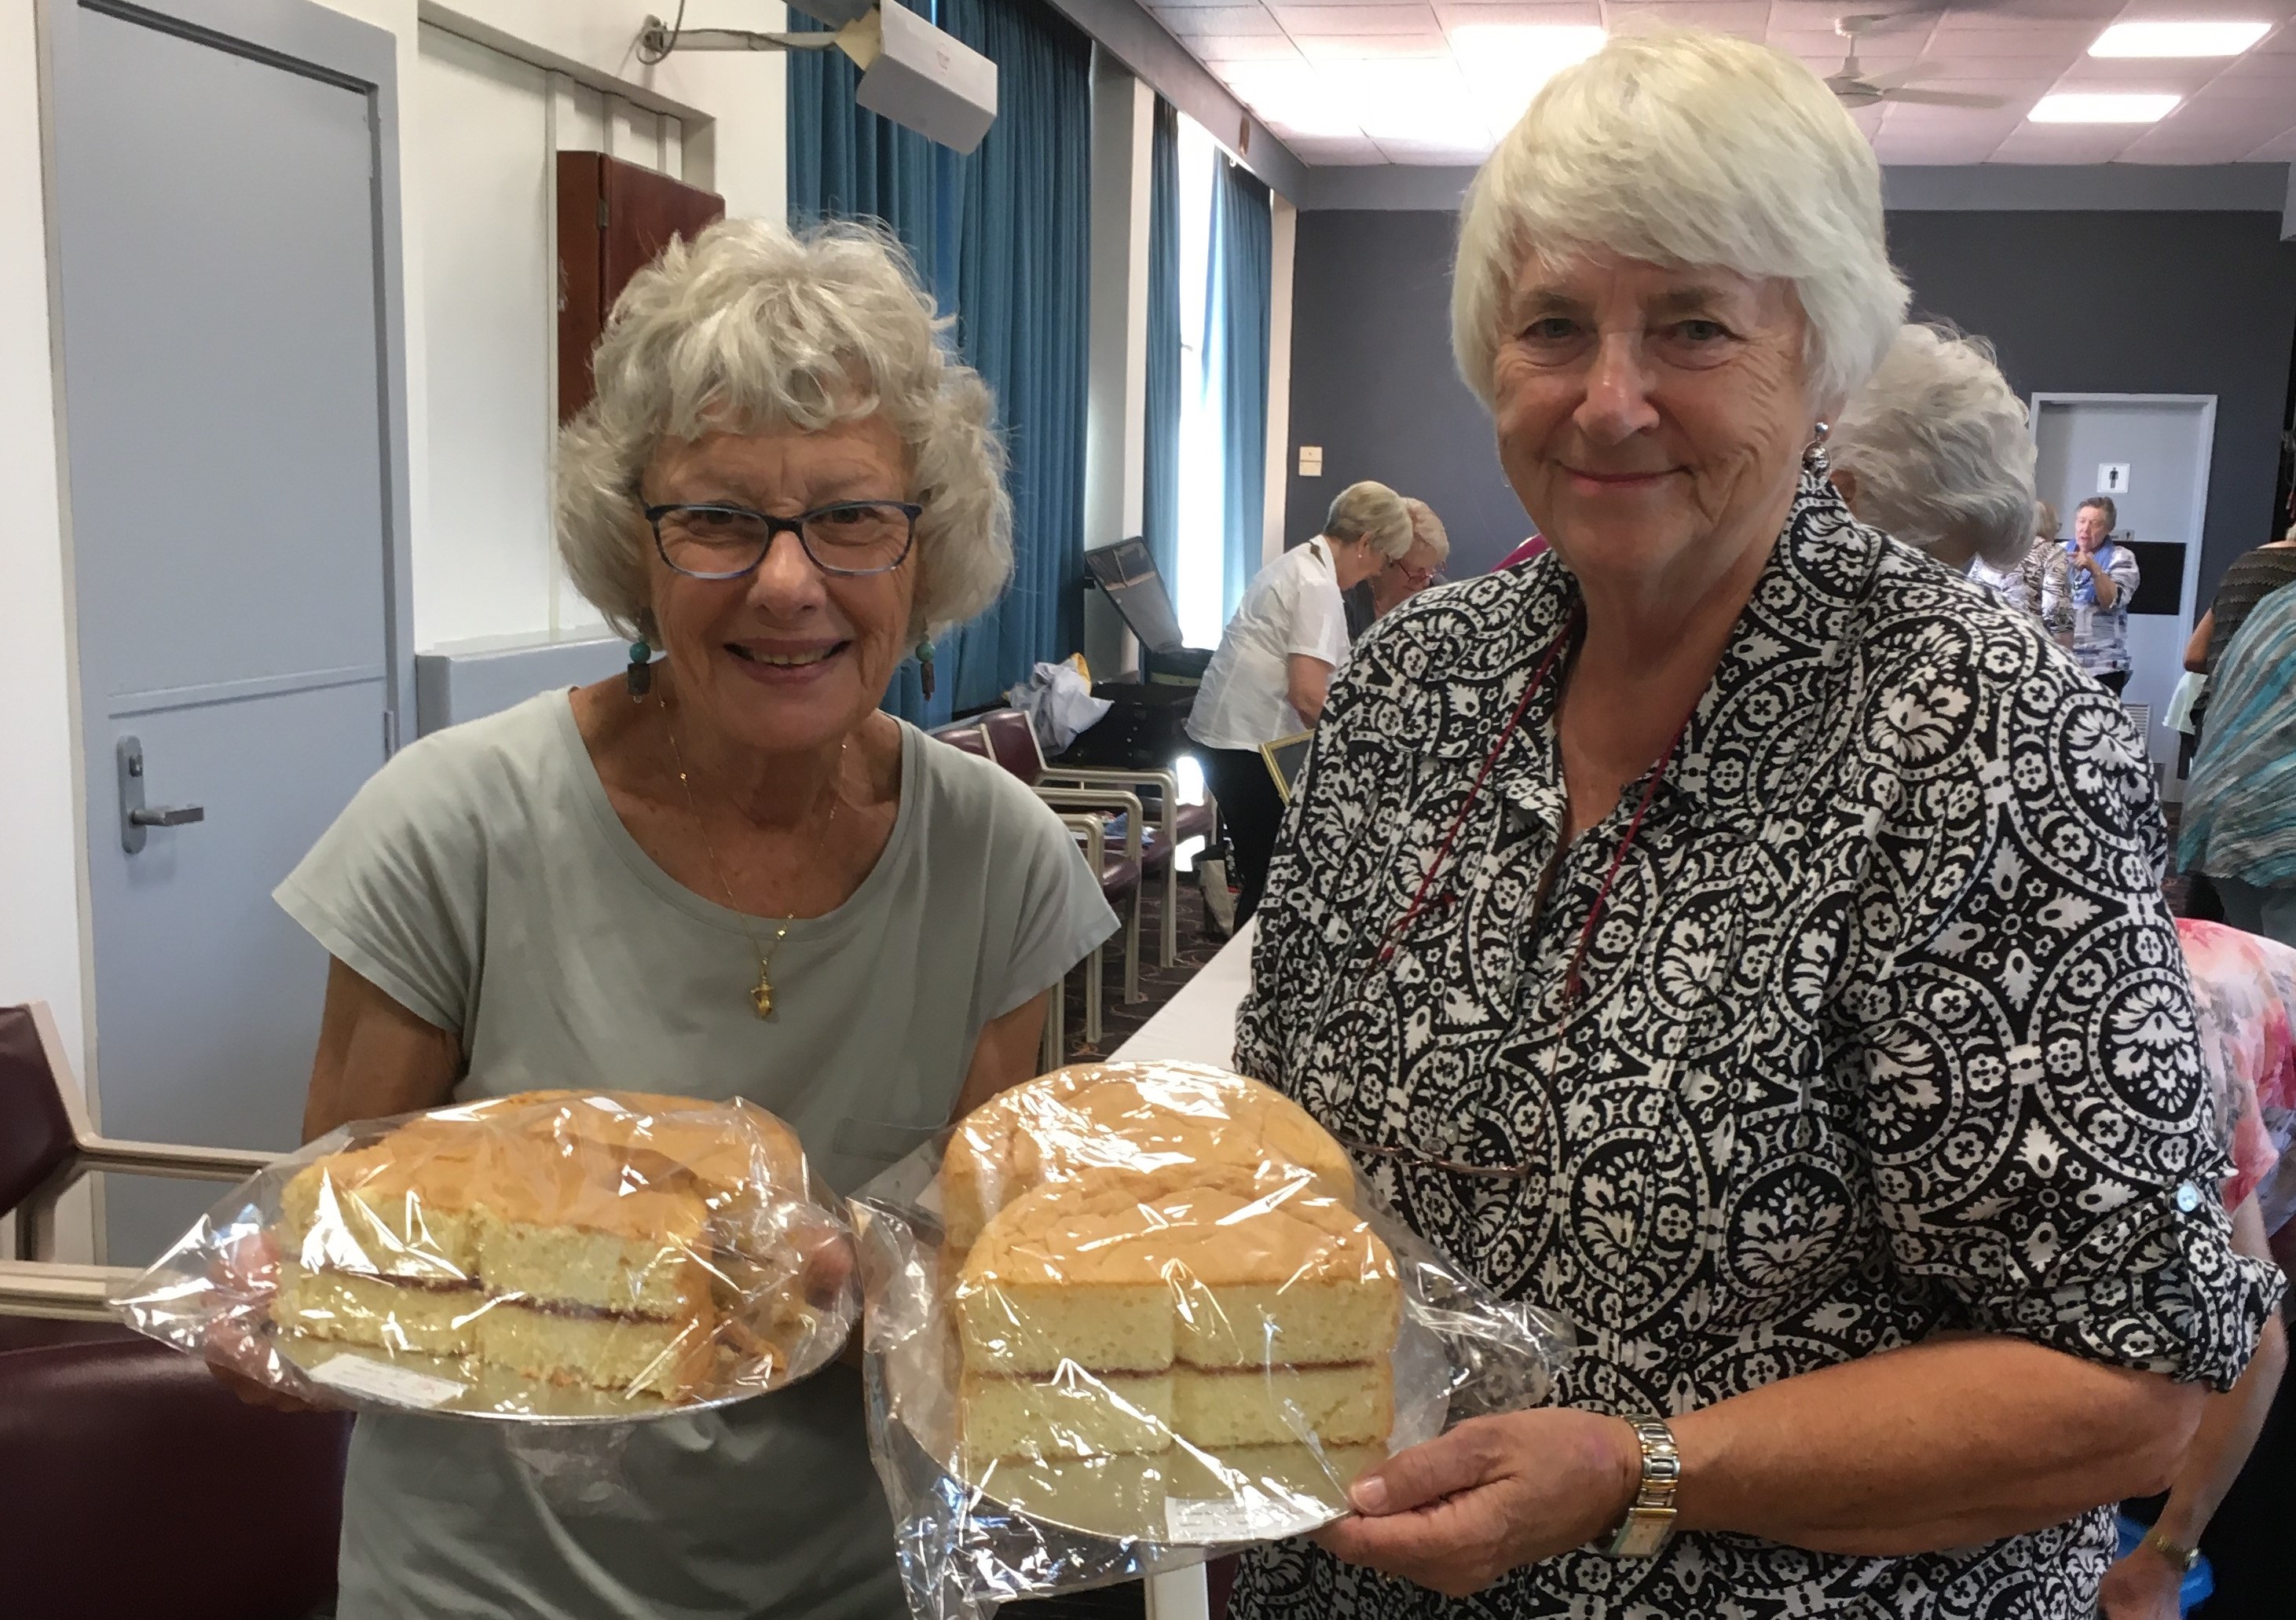 Cakes, cows and competitions for CWA conference in Bega